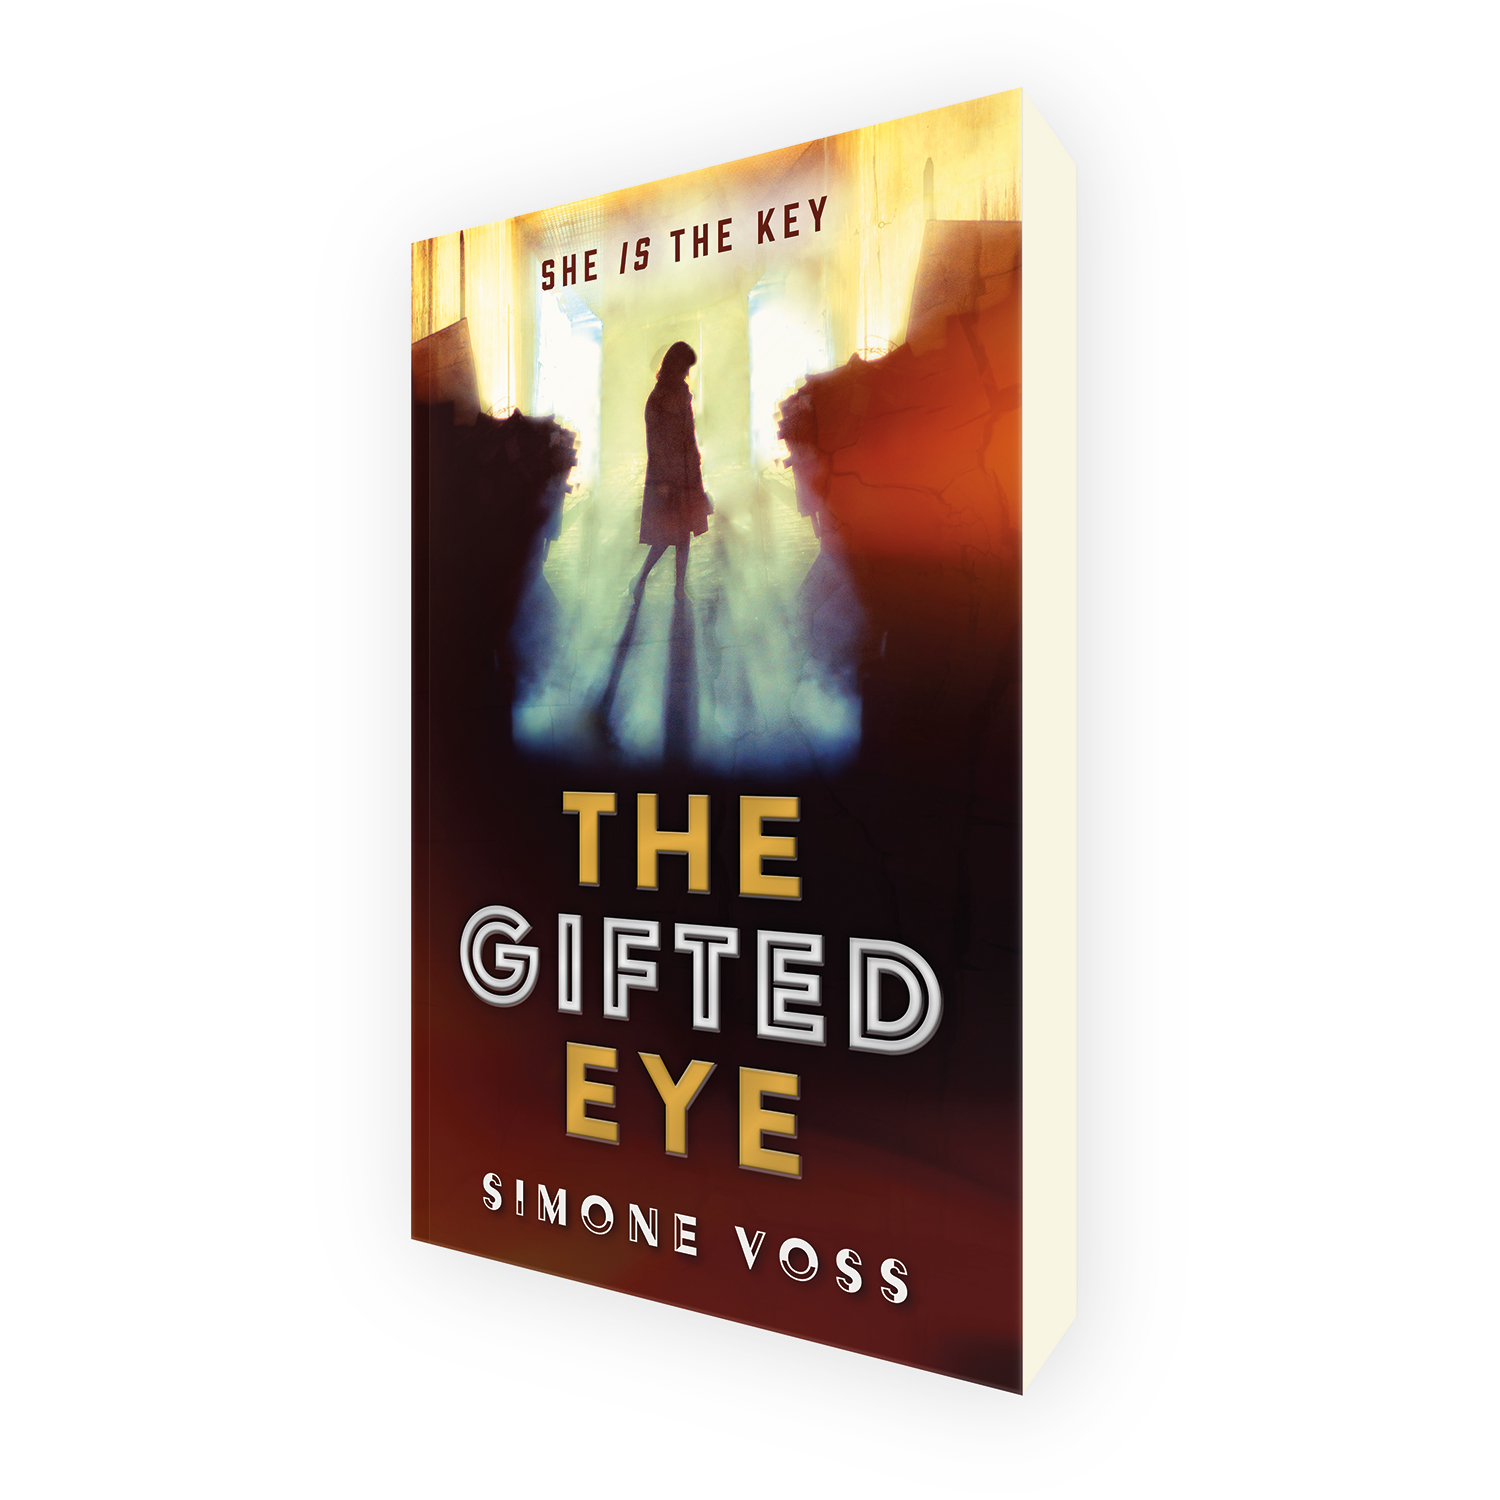 'The Gifted Eye' is a bespoke cover design for a modern paranormal thriller novel. The book cover was designed by Mark Thomas, of coverness.com. To find out more about my book design services, please visit www.coverness.com.